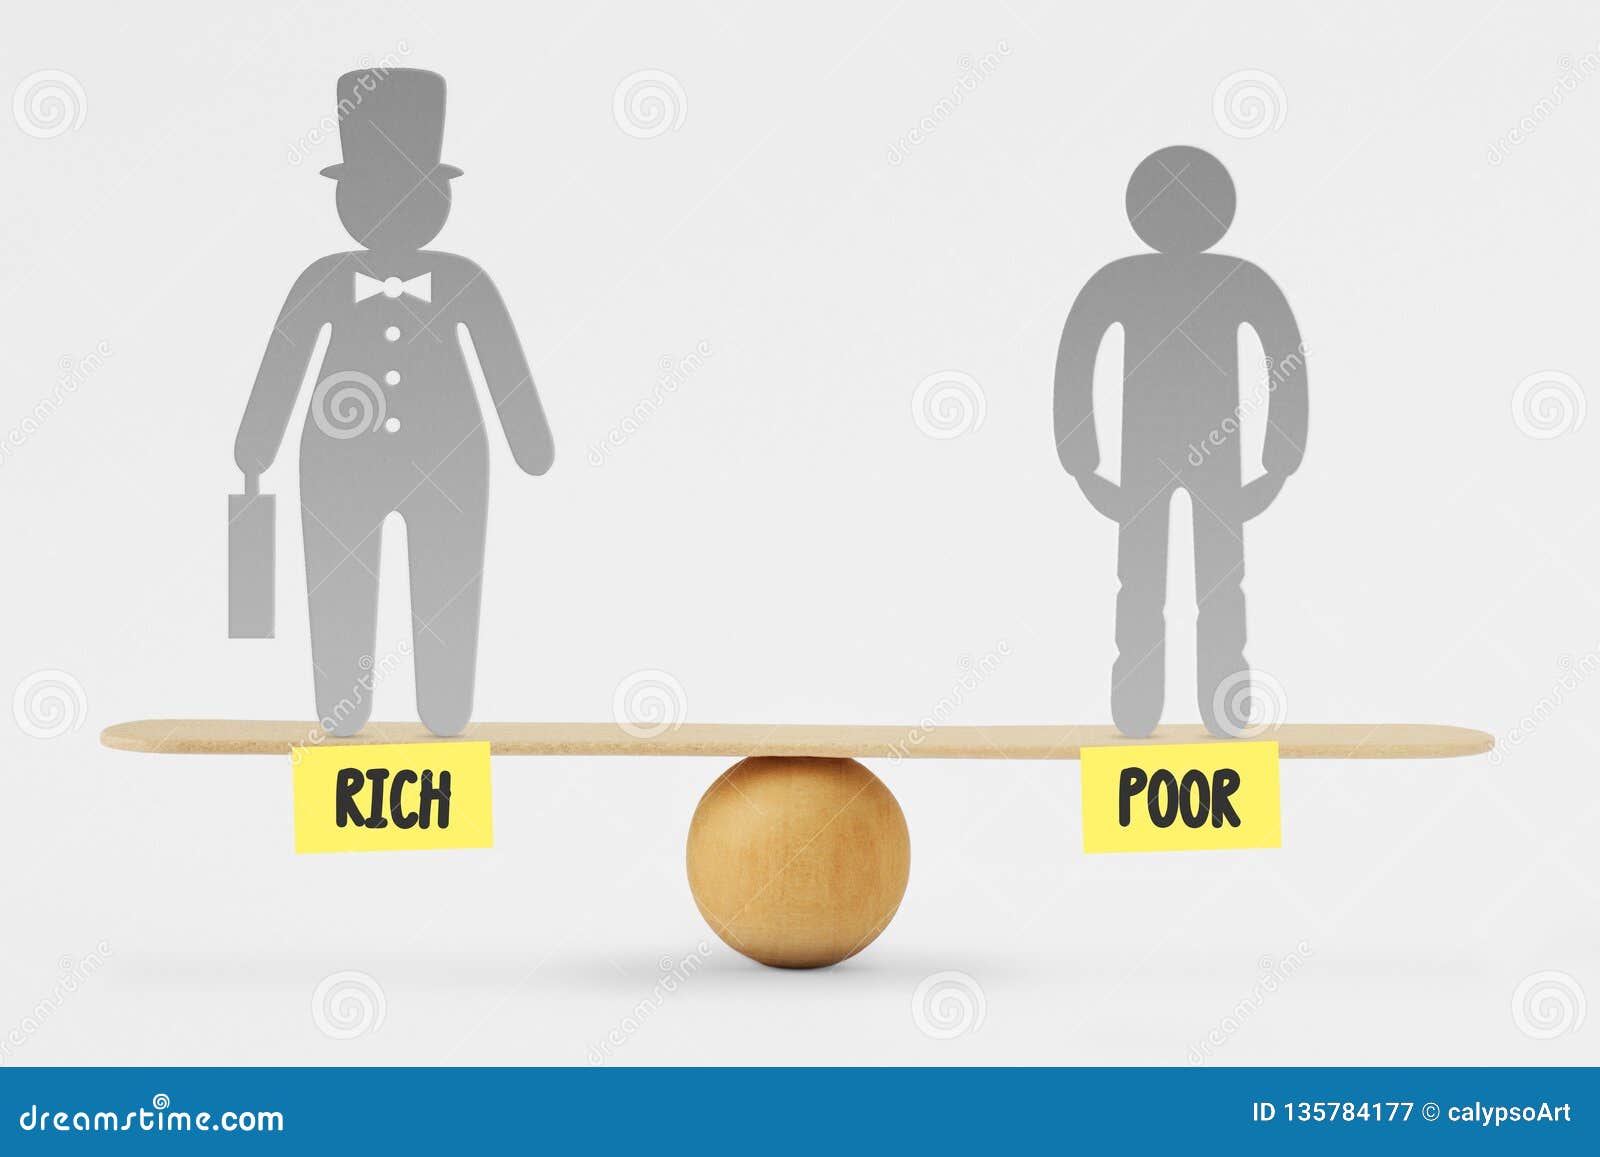 poor and rich people on balance scale - concept of social equality